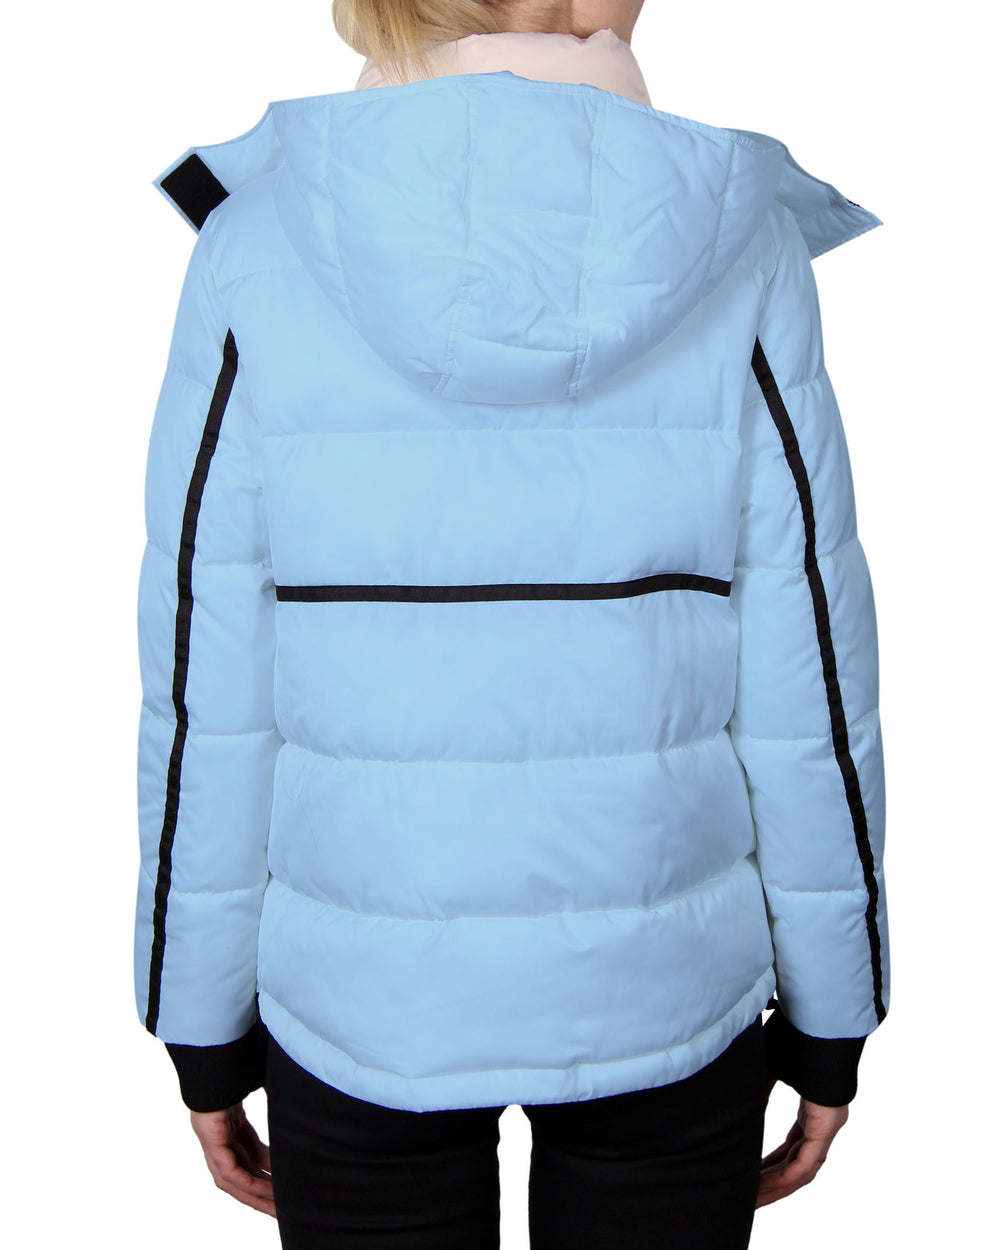 Women's Quilted Pullover - Skyblue/Khaki - Body Glove